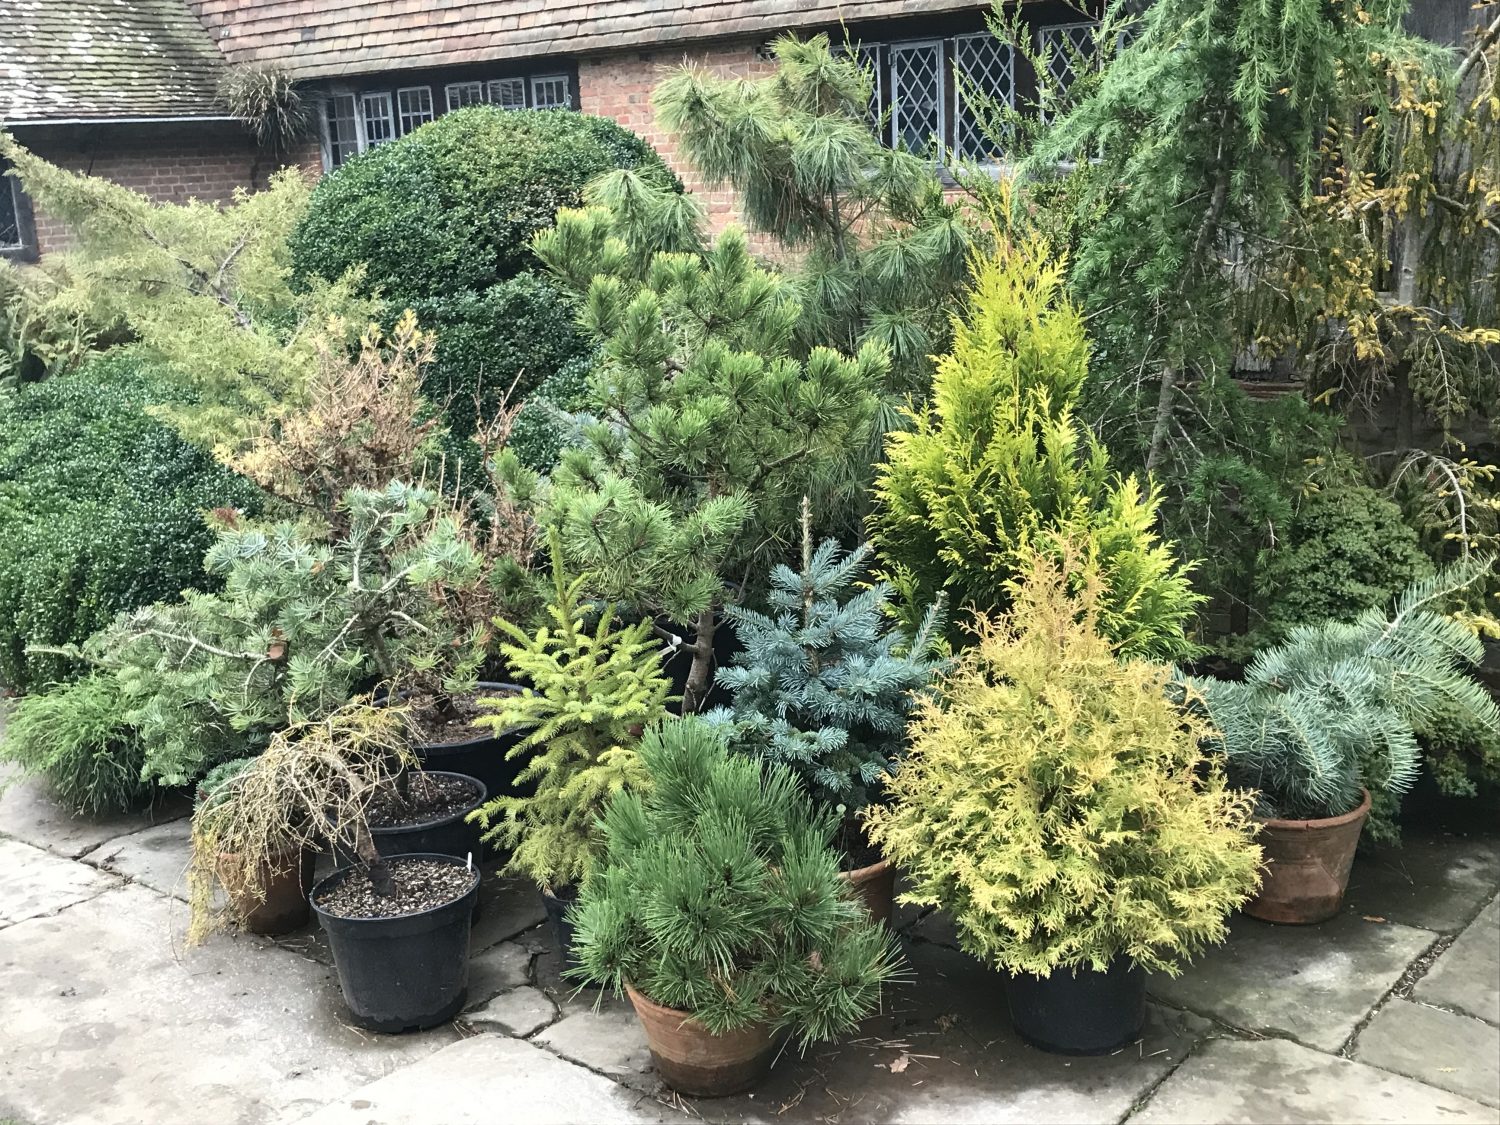 Conifers in containers at Great Dixter